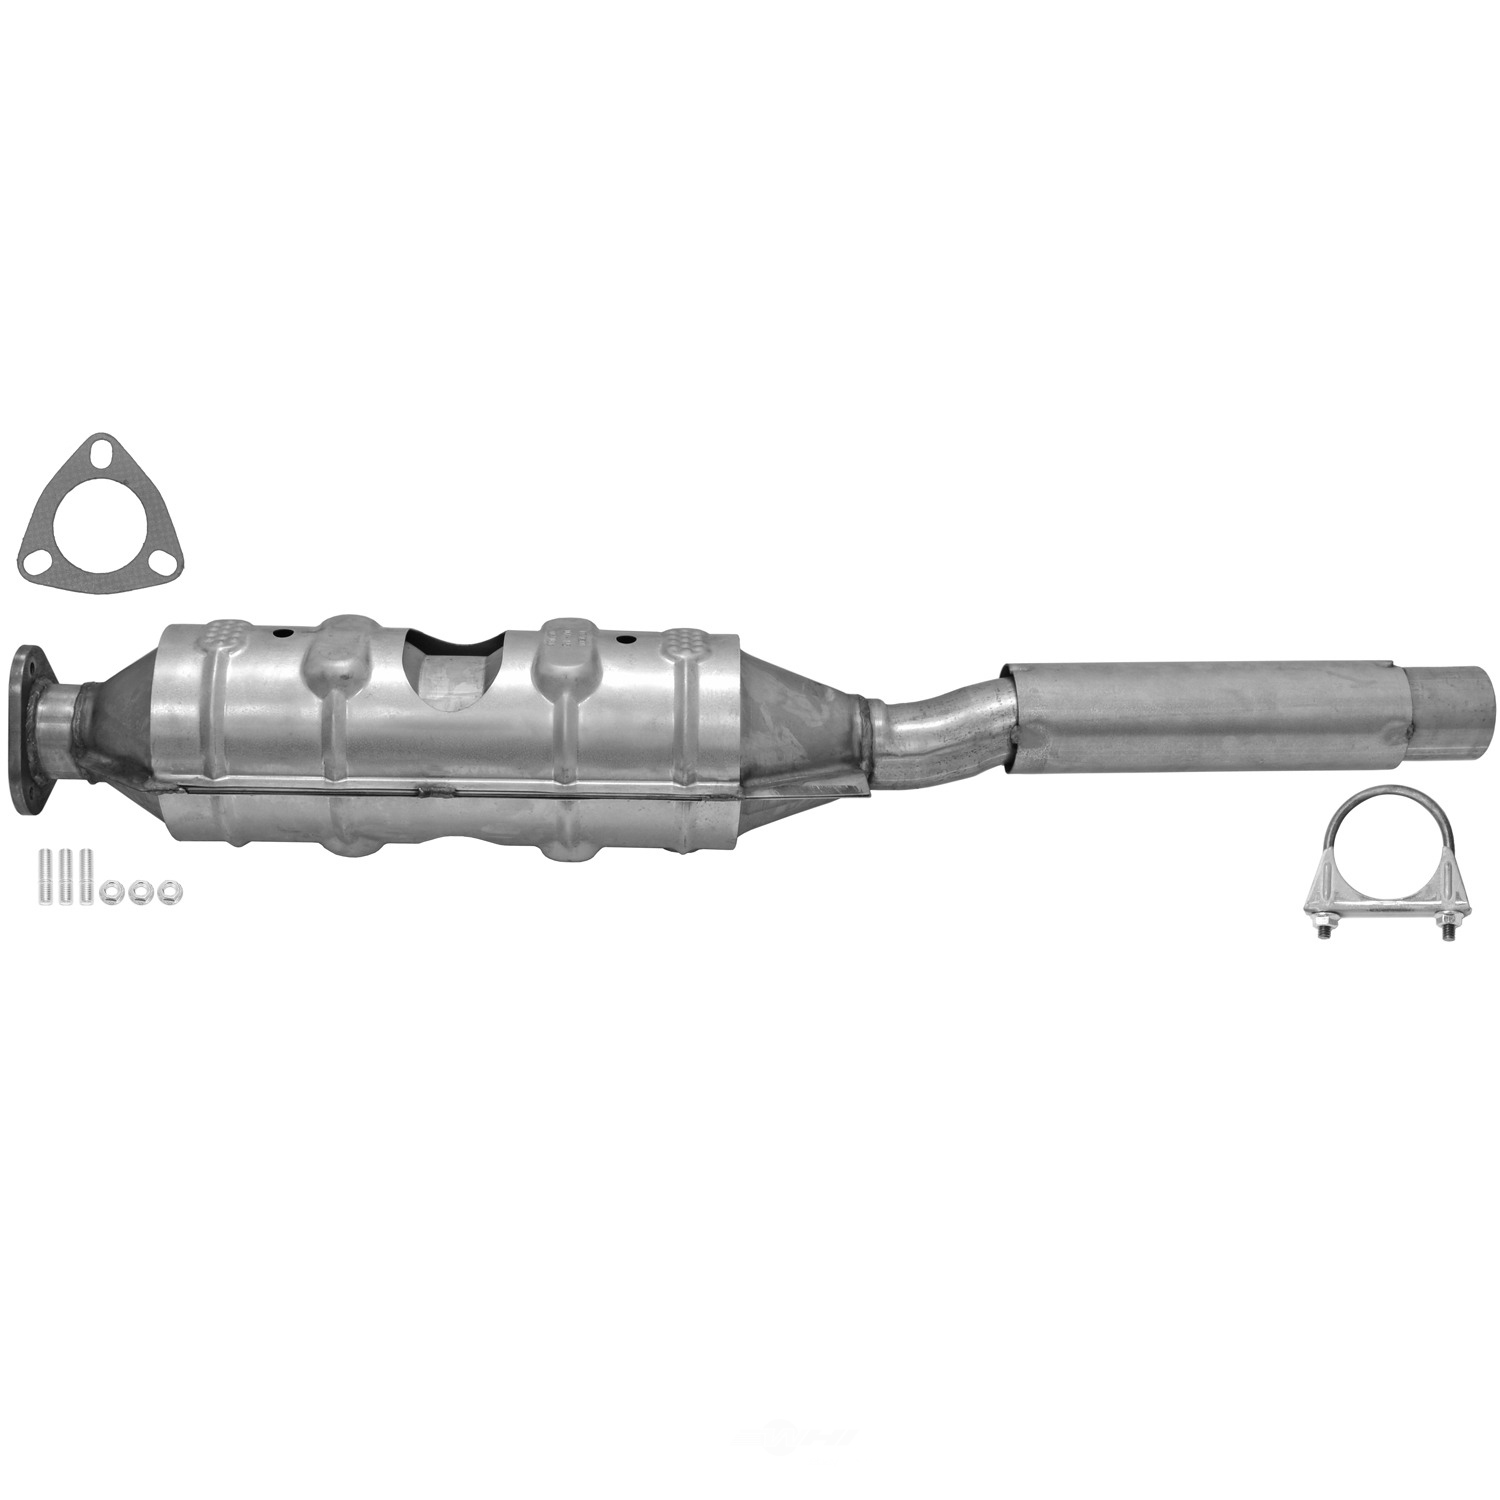 Catalytic Converter-Direct Fit fits 06-07 Ford E-350 Super Duty 6.8L-V10 2001 Ford Excursion V10 Catalytic Converter